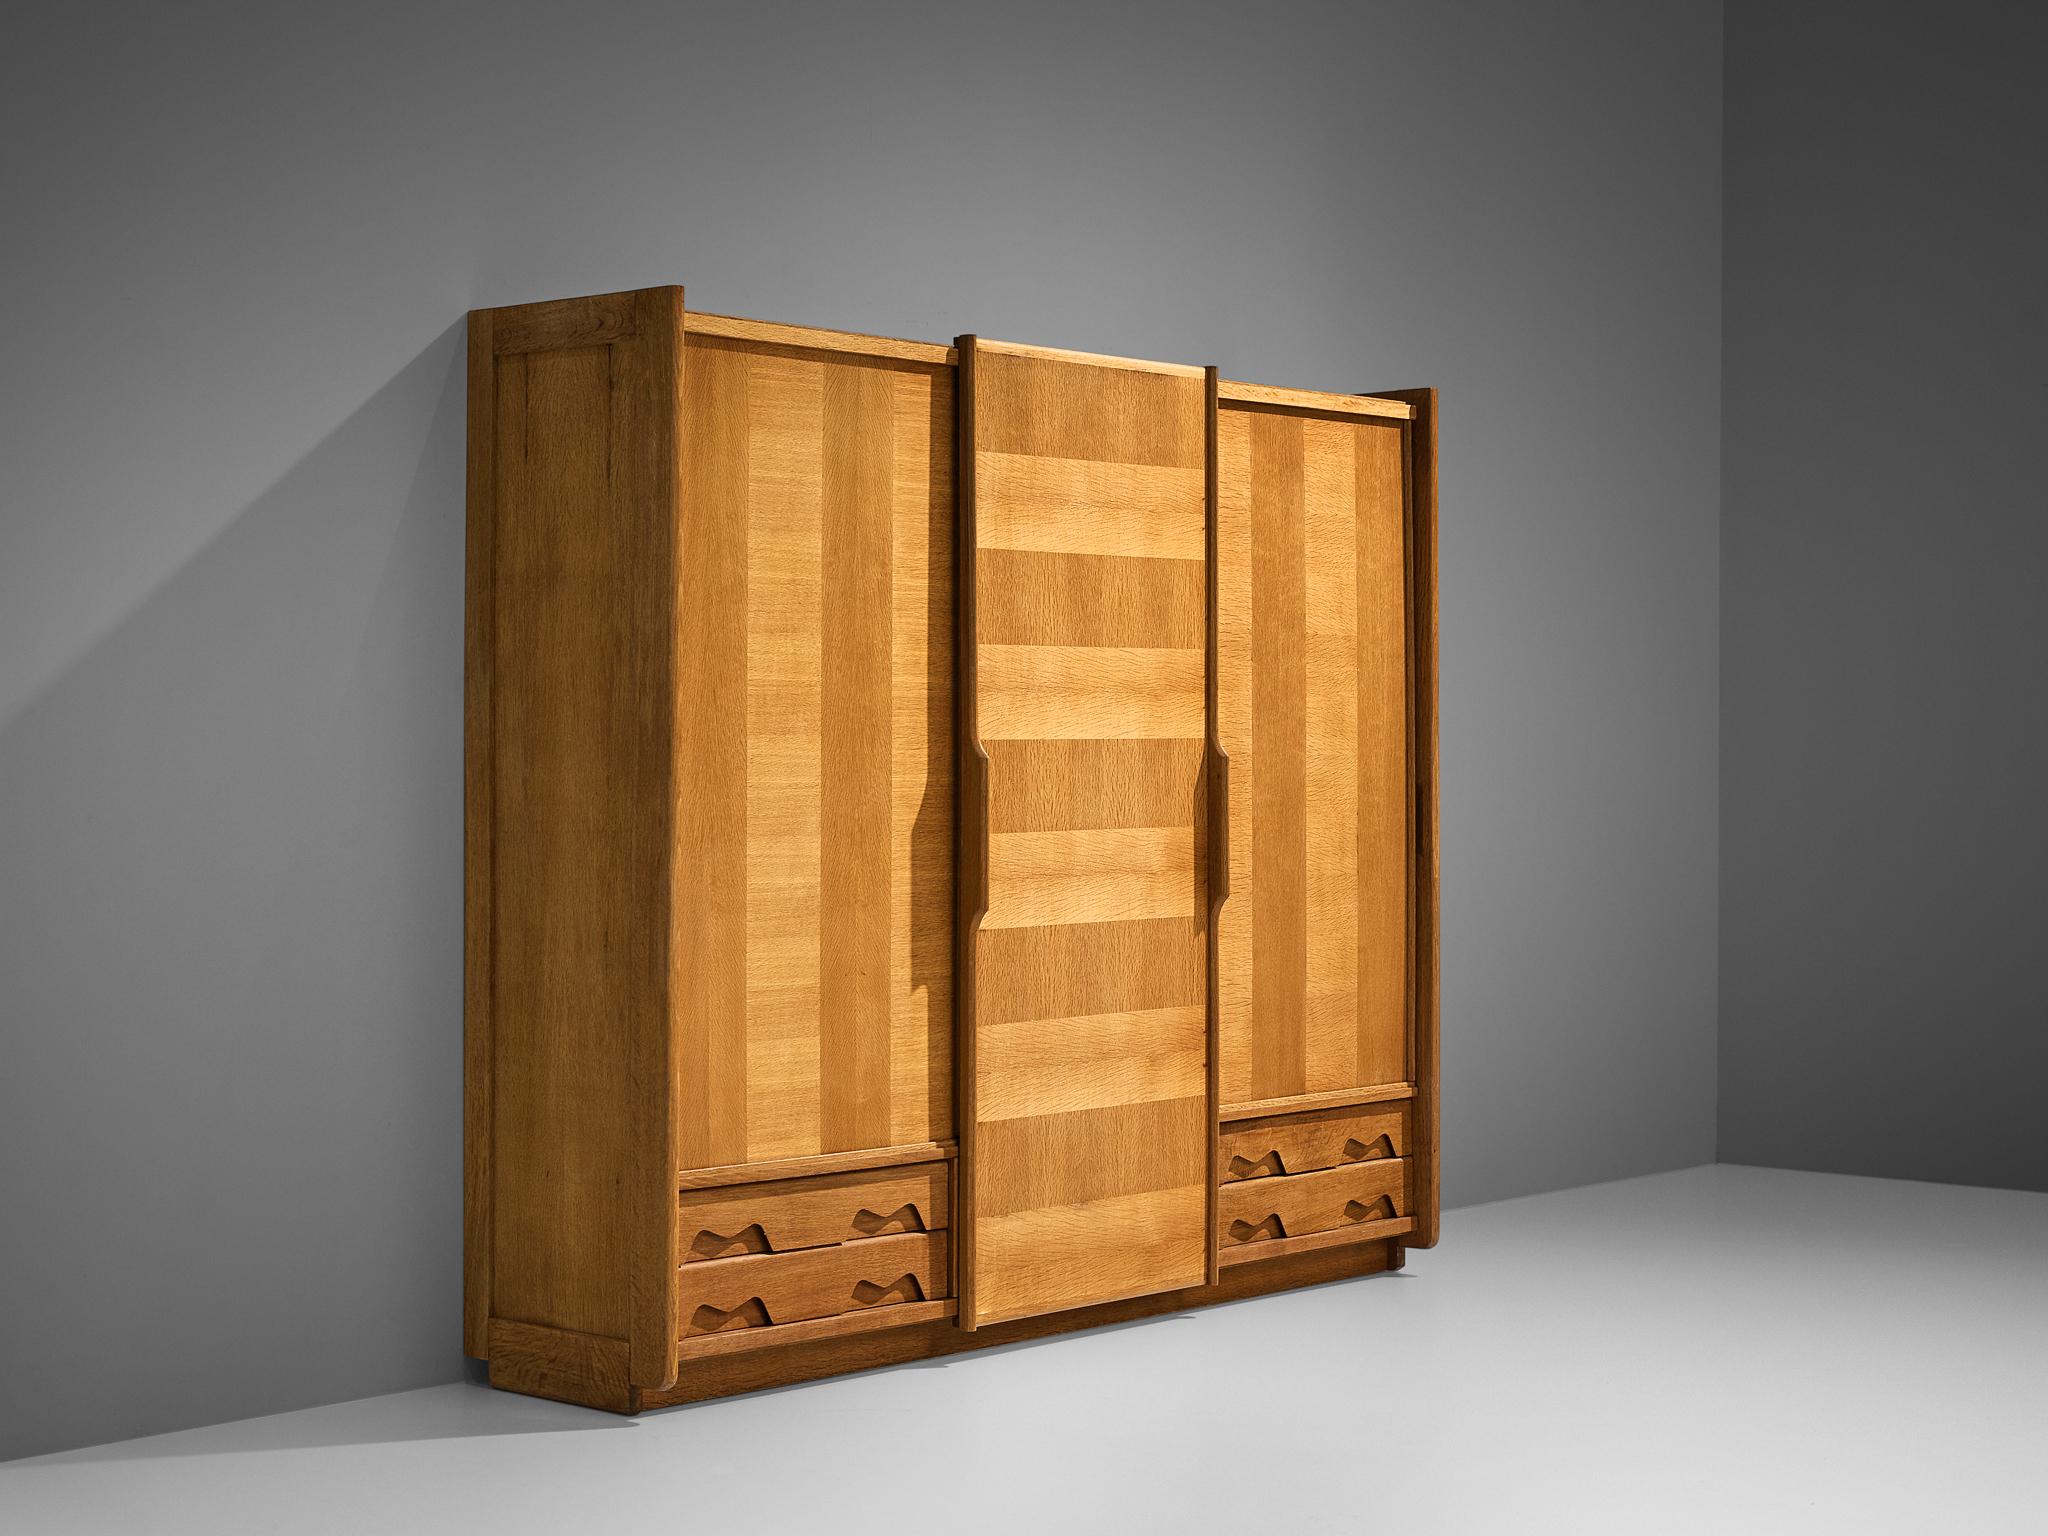 Guillerme et Chambron for Votre Maison, wardrobe, oak, France, 1960s.

This grandiose wardrobe is a good example of excellent woodworking by virtue of the inlay veneer and the graphic designed door panels, creating a rhythmic pattern to the front.